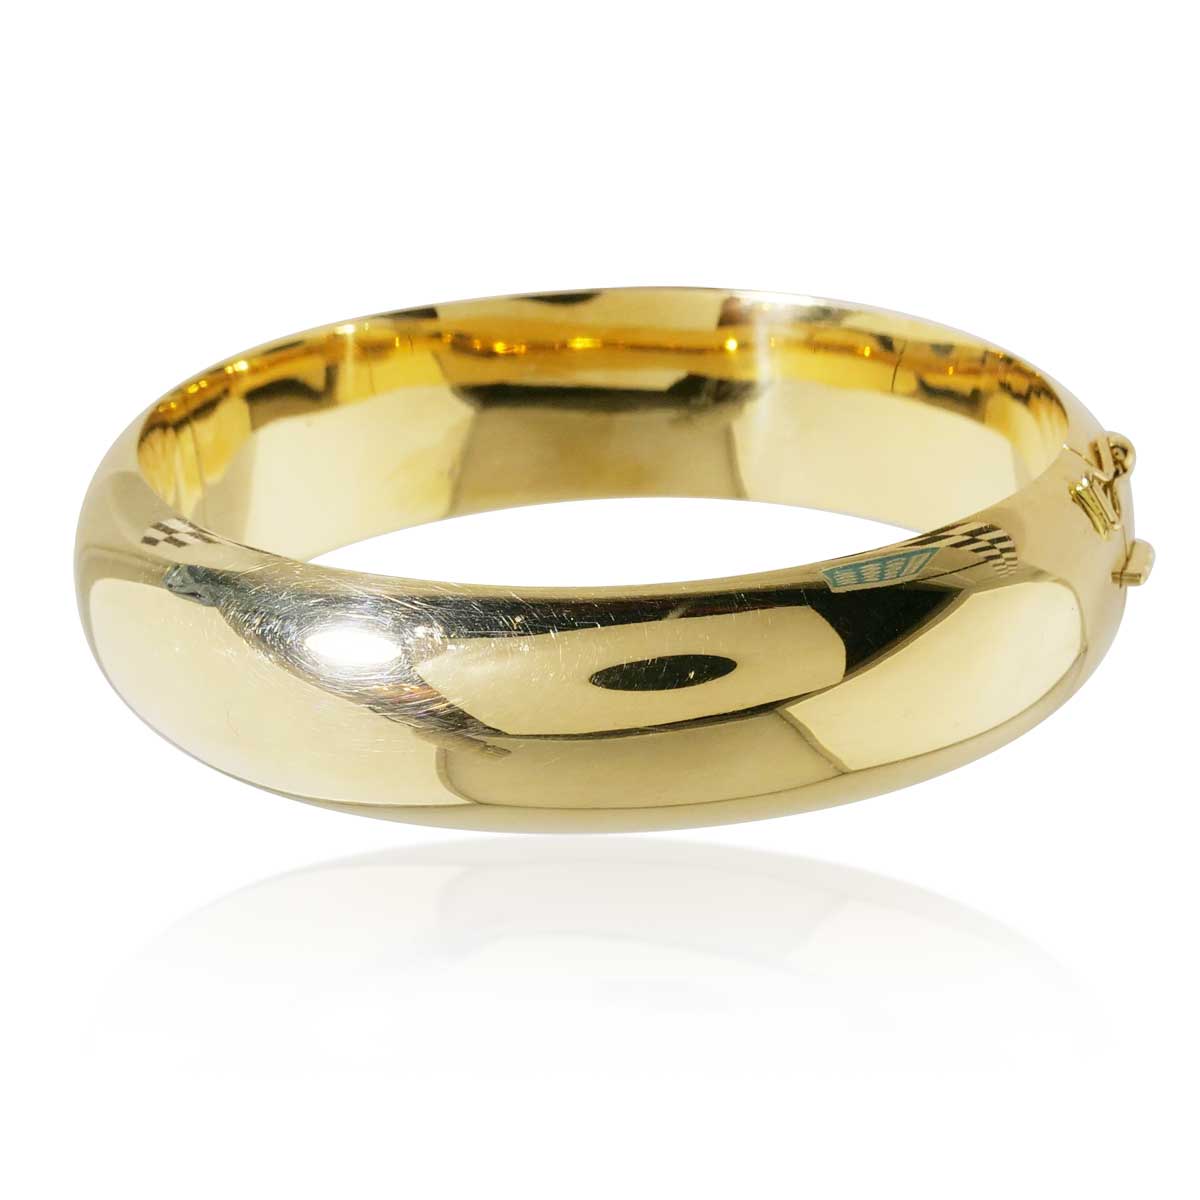 Gold-Armreif, Armspange in oval in 18kt Gelbgold